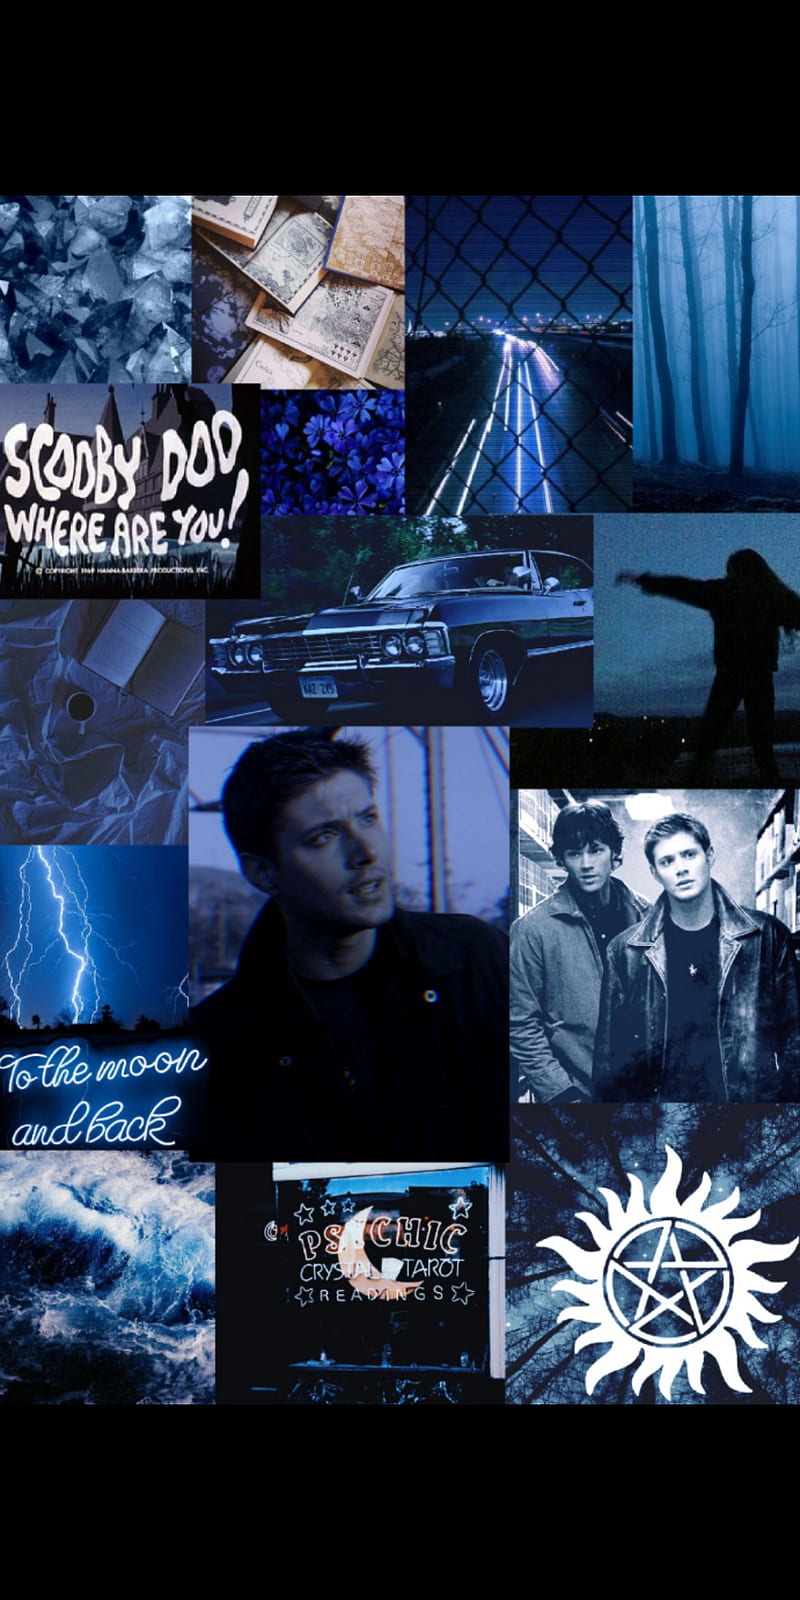 Download Supernatural wallpapers for mobile phone free Supernatural HD  pictures